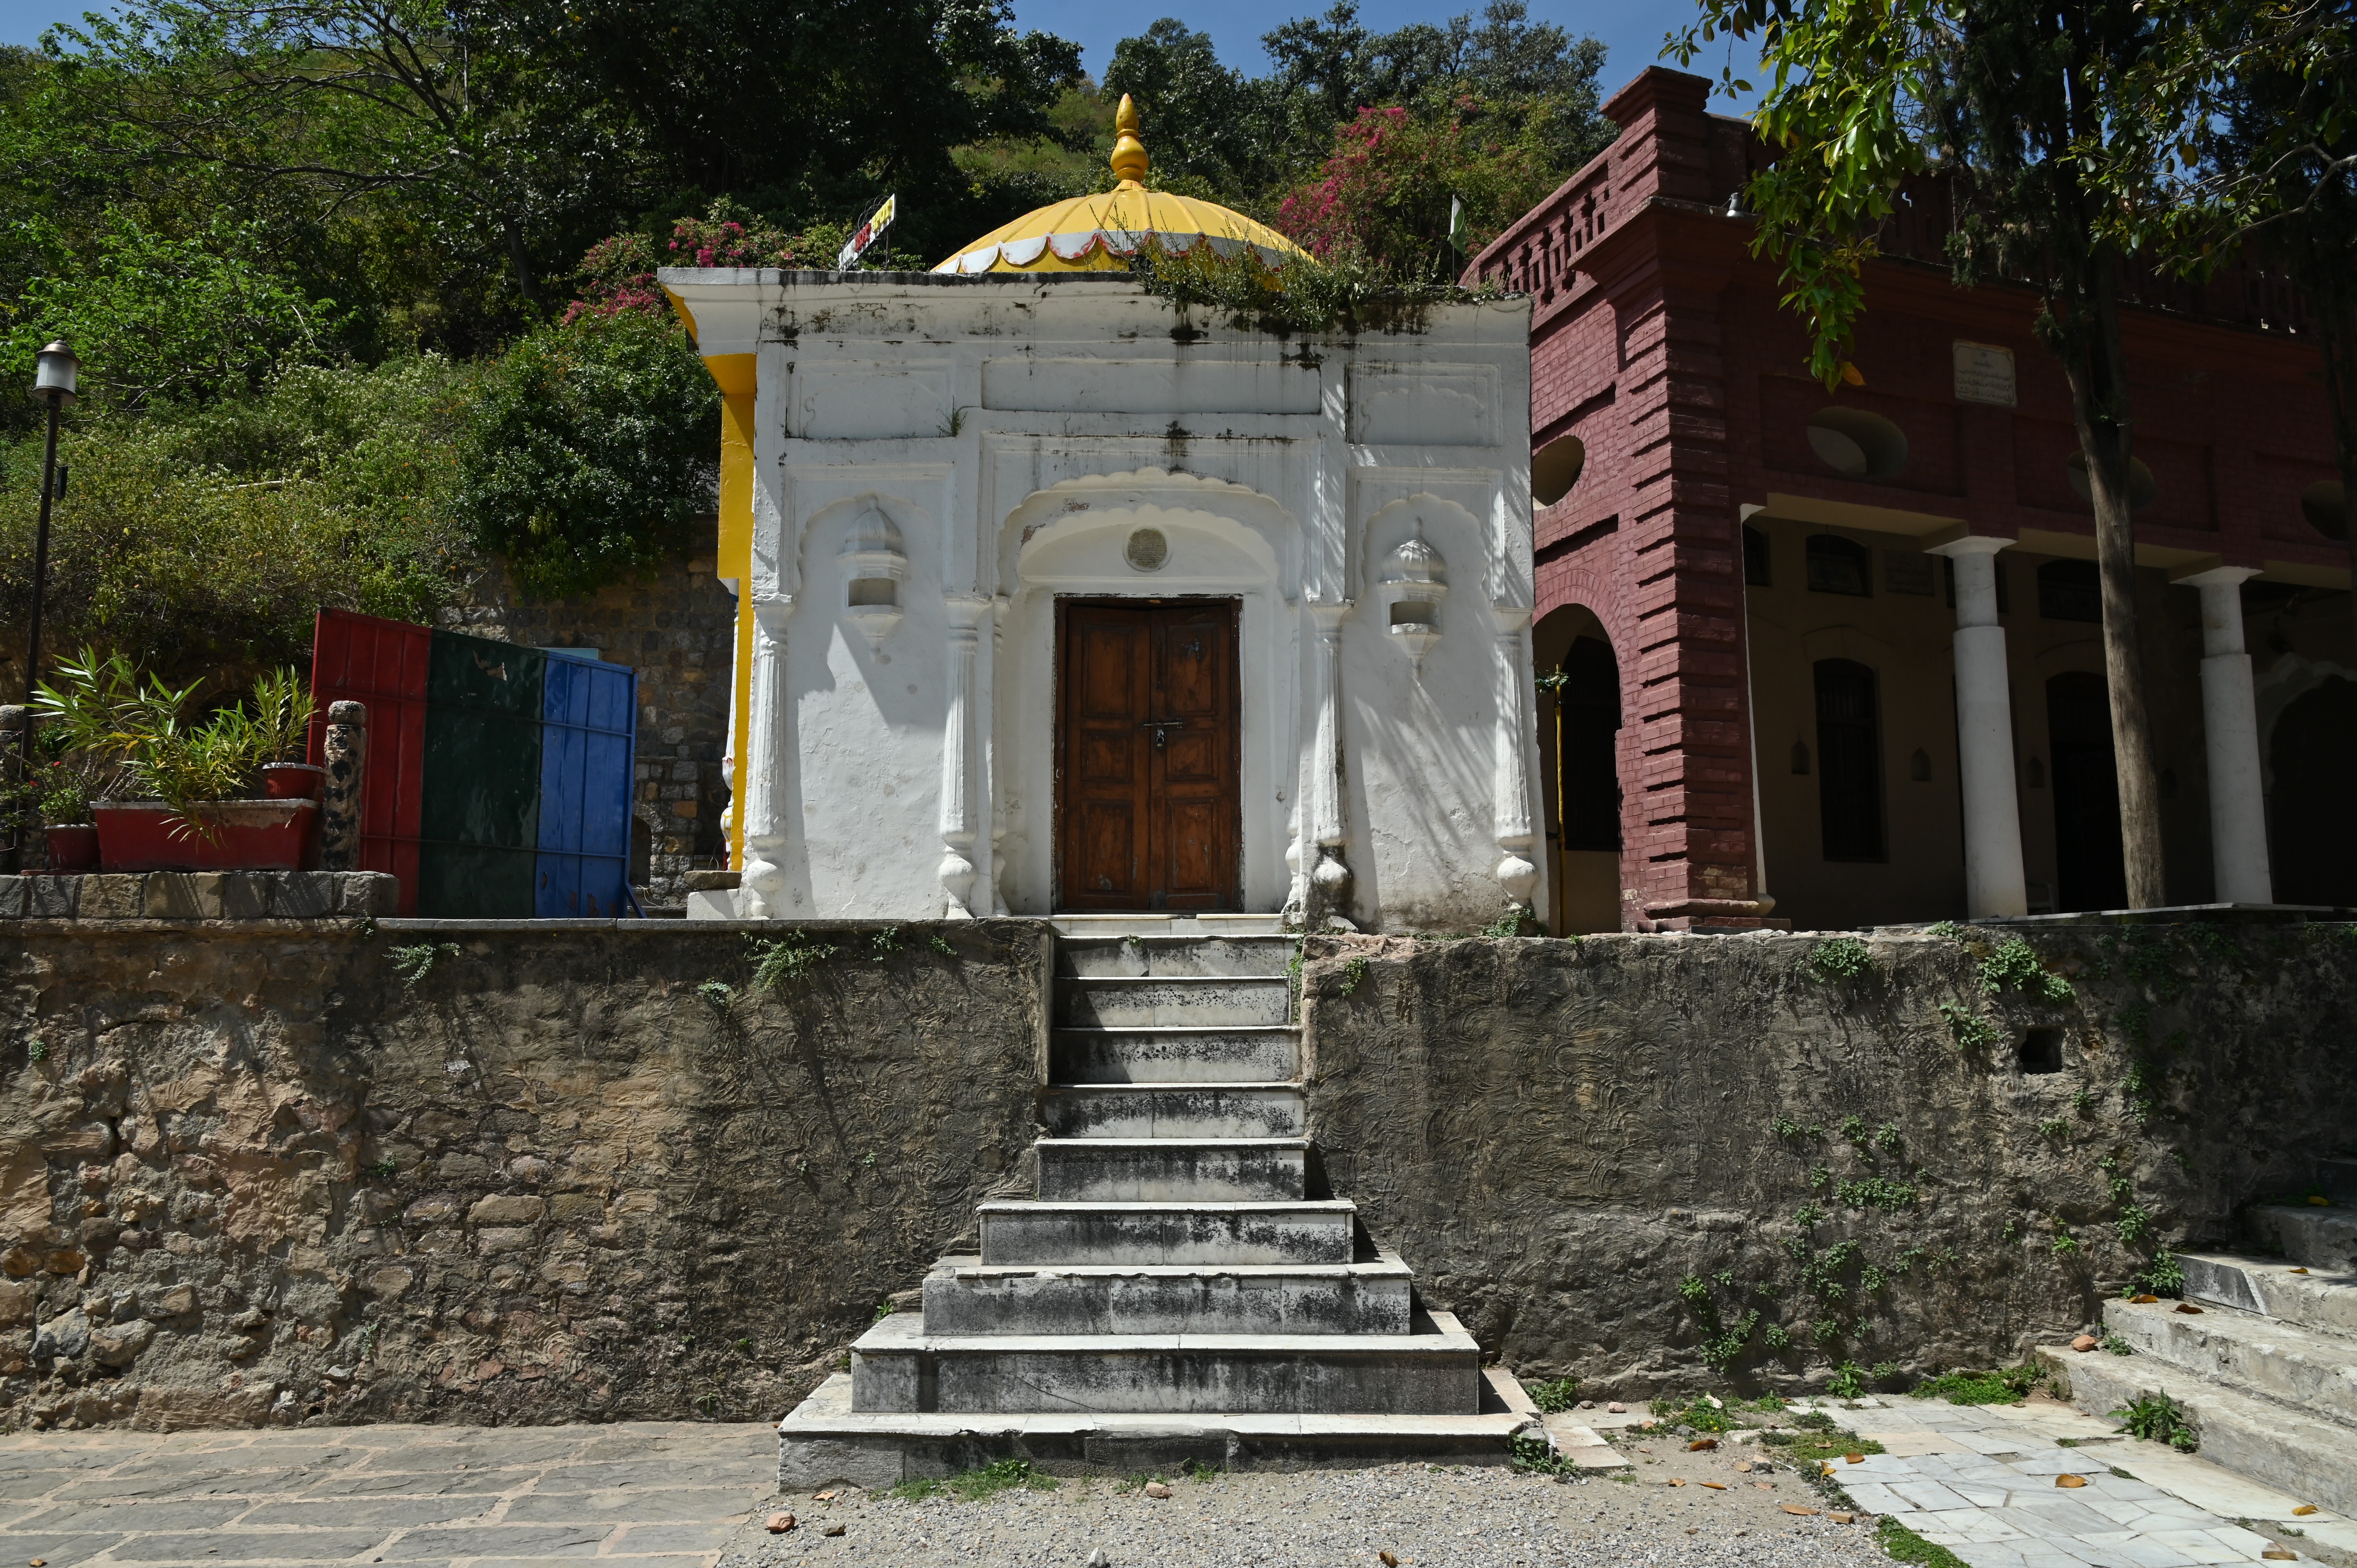 Rama Temple, also known as Ram Kund Temple, dedicated to the Hindu God Rama situated in Saidpur Village